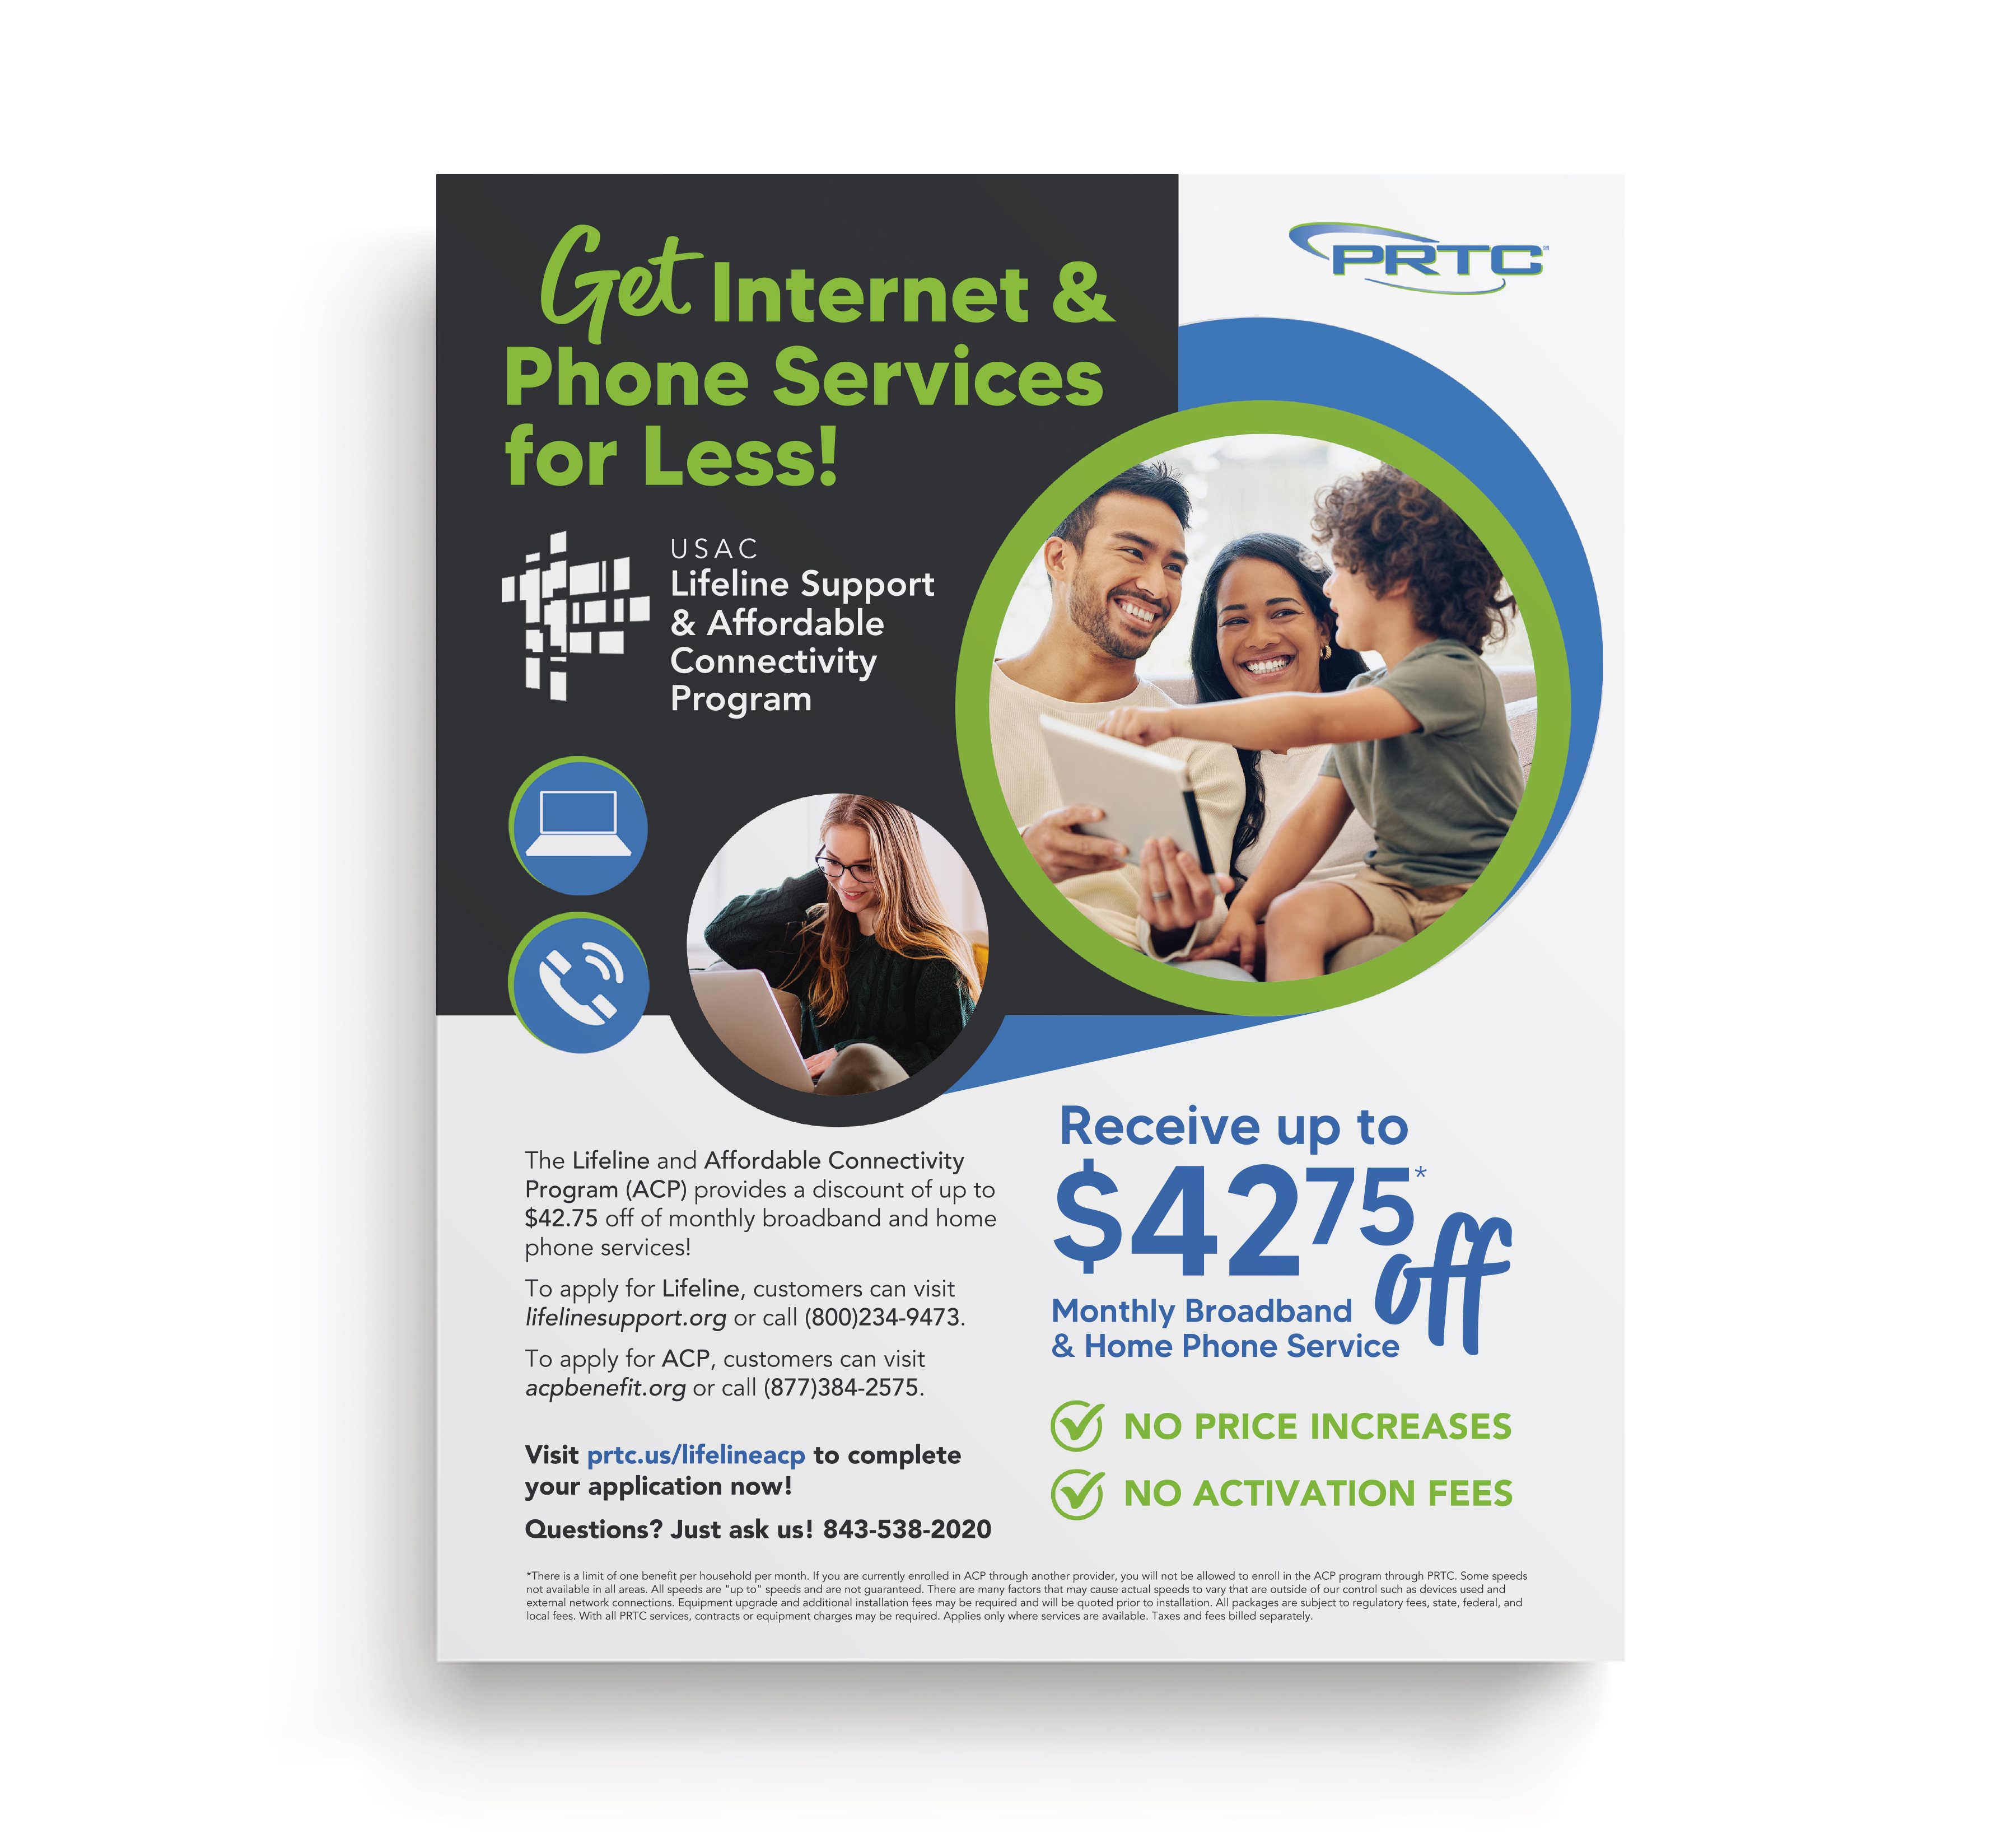 The 10 Ways to Get Internet Savvy flyer was created for Verizon Wireless to  support a FREE tablets and smart…